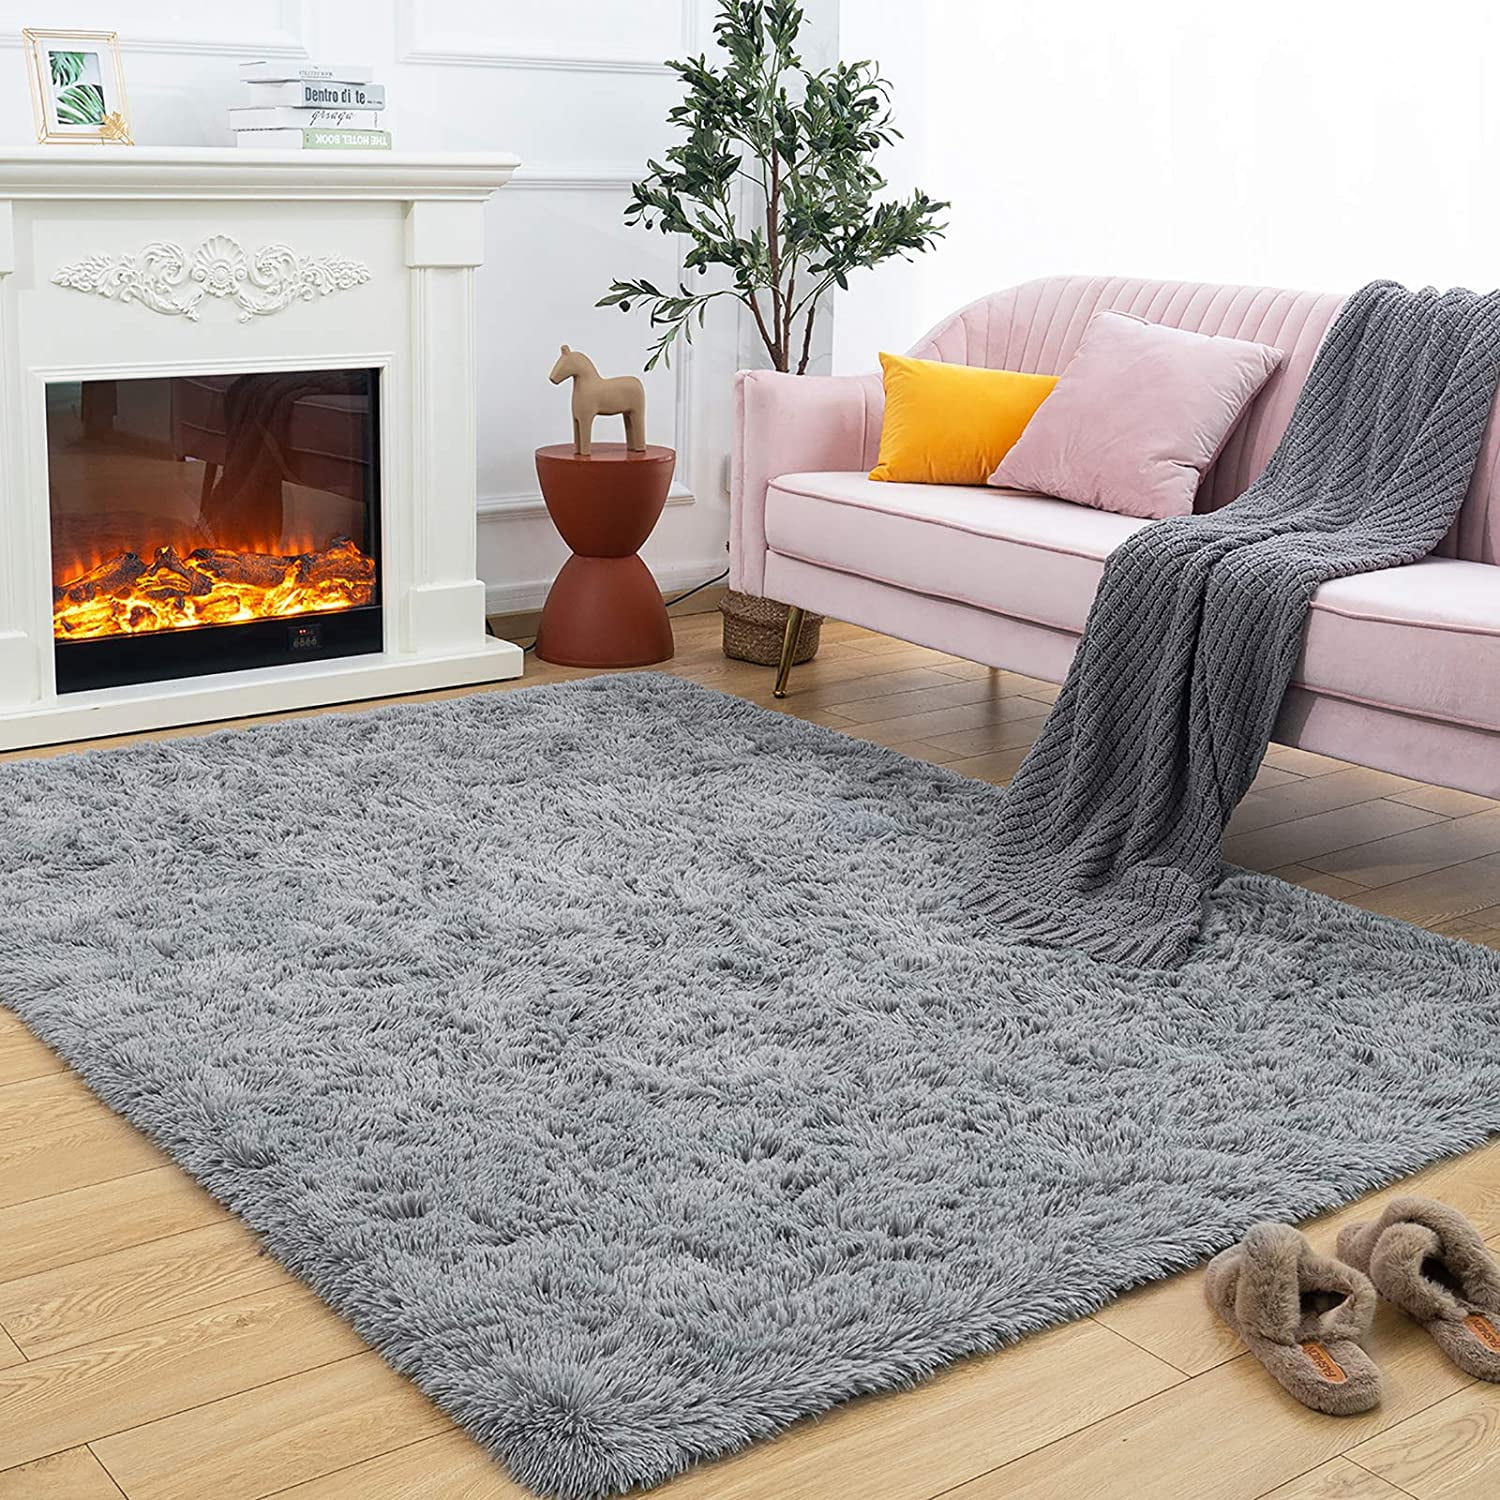 Arte ESPINA SHAGGY RUG Fur Look Soft Cosy Lounge Anthracite 